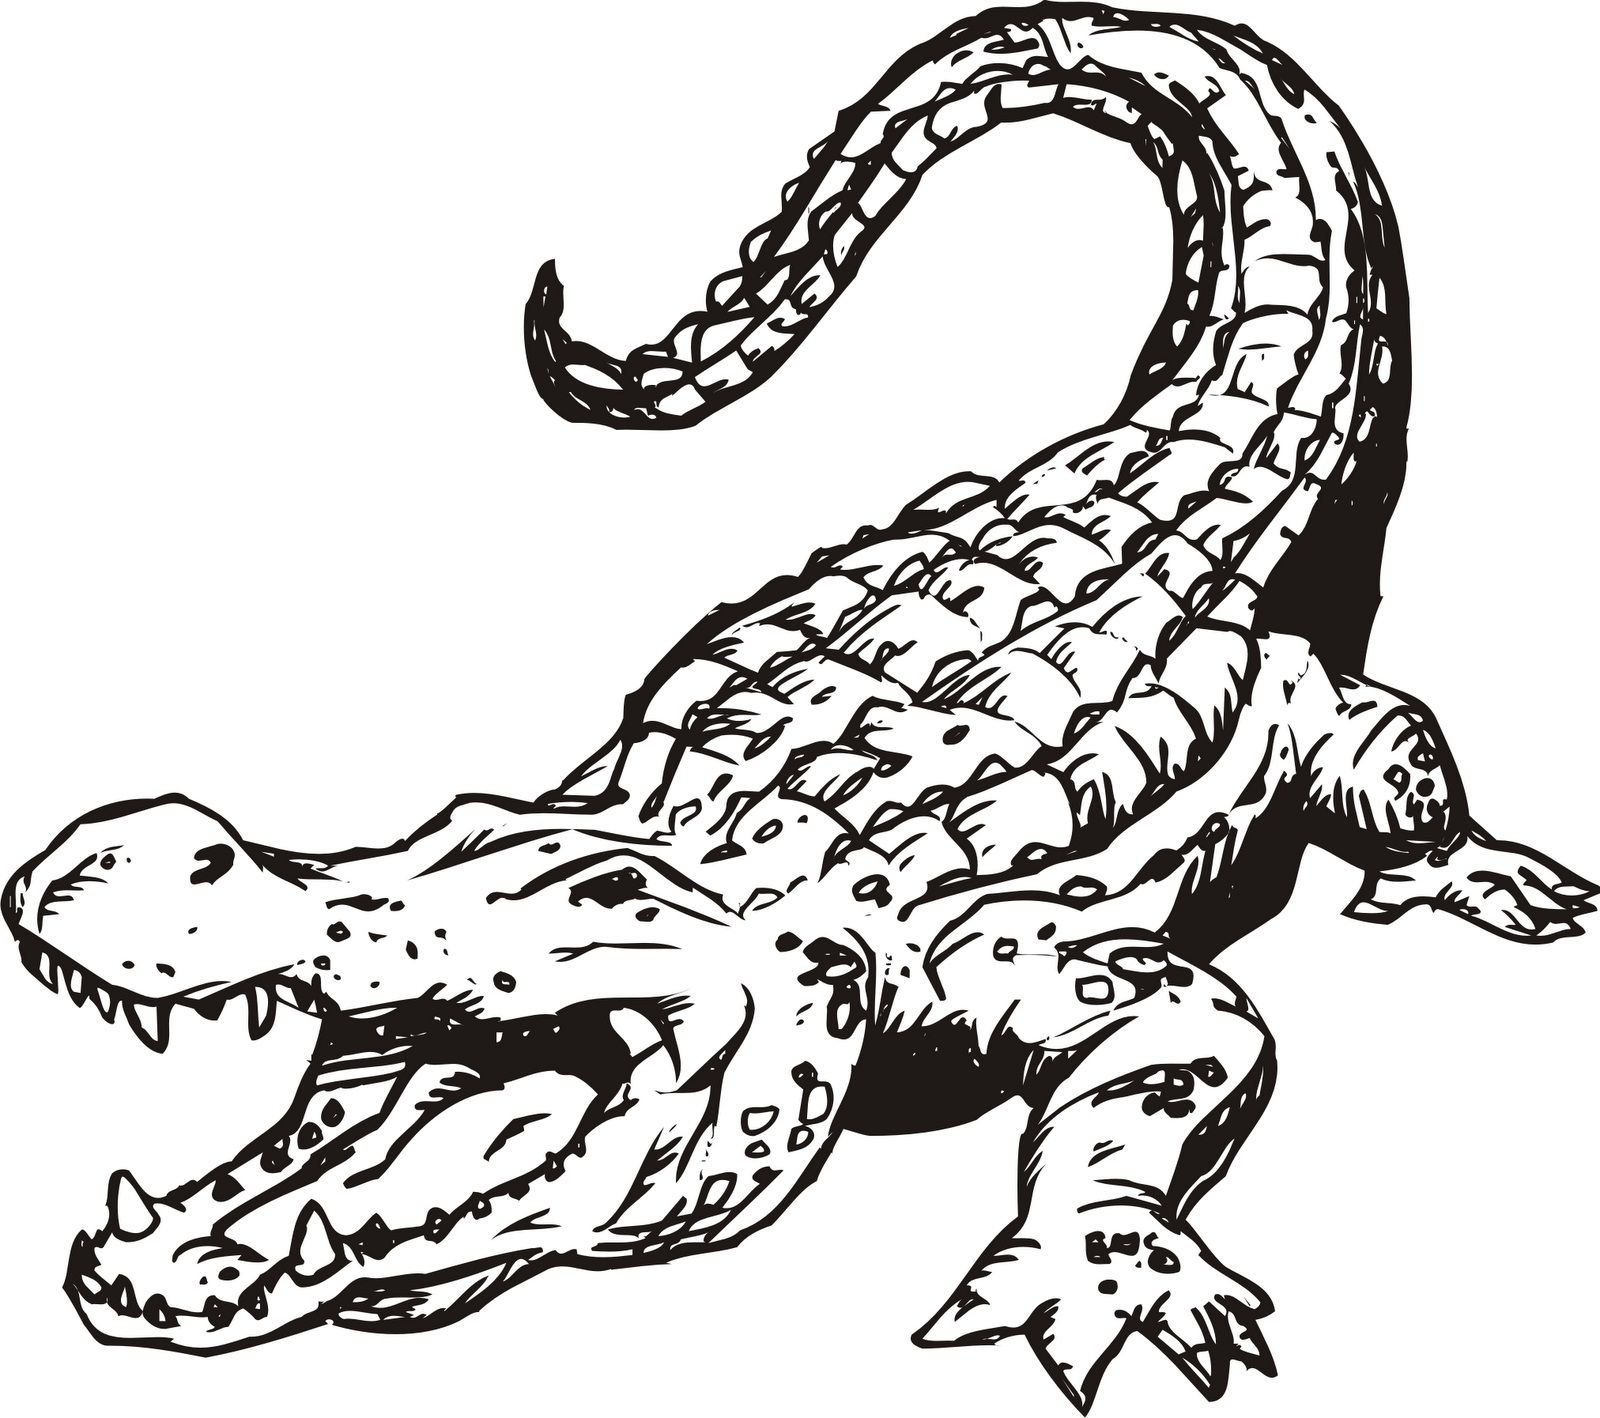 alligator clipart scary